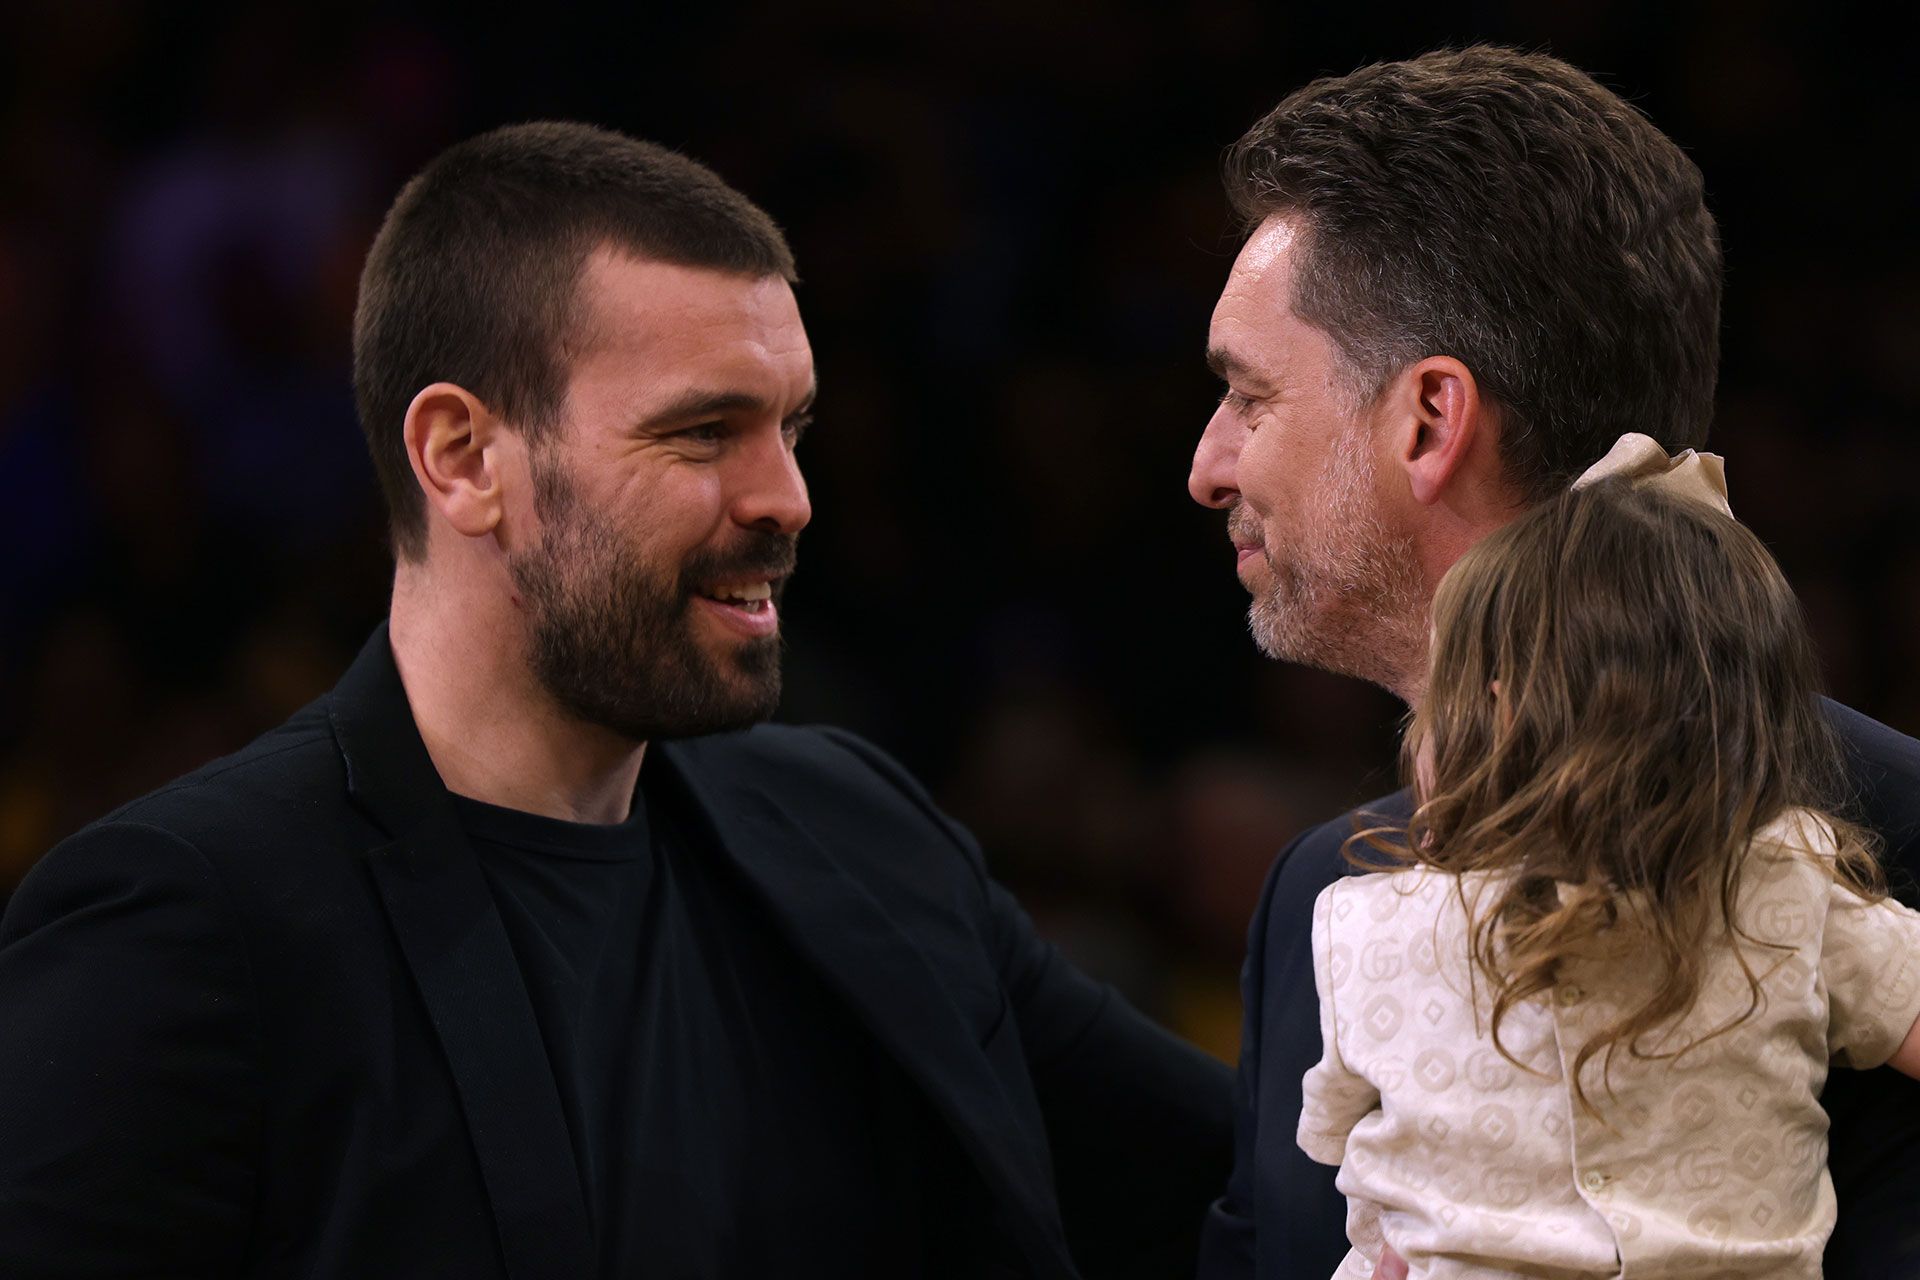 LOS ANGELES, CALIFORNIA - MARCH 07: (L-R) Marc Gasol smiles with his brother Pau Gasol #16 of the Los Angeles Lakers during his jersey retirement ceremony at halftime in the game between the Memphis Grizzlies and the Los Angeles Lakers at Crypto.com Arena on March 07, 2023 in Los Angeles, California.